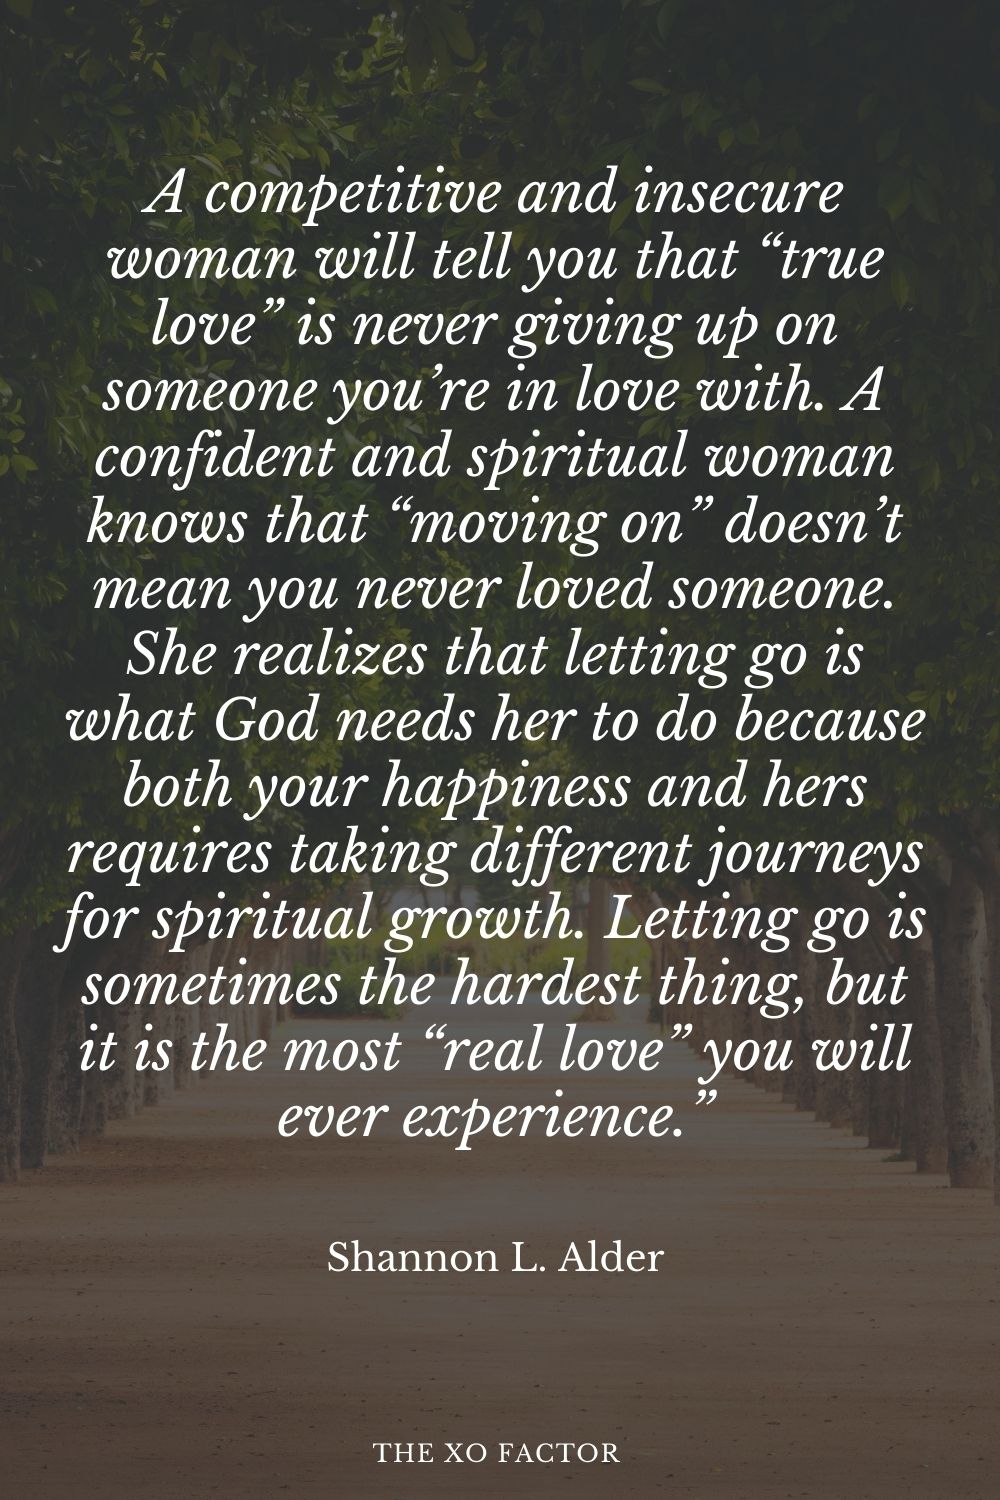 A competitive and insecure woman will tell you that “true love” is never giving up on someone you’re in love with. A confident and spiritual woman knows that “moving on” doesn’t mean you never loved someone. She realizes that letting go is what God needs her to do because both your happiness and hers requires taking different journeys for spiritual growth. Letting go is sometimes the hardest thing, but it is the most “real love” you will ever experience.” Shannon L. Alder